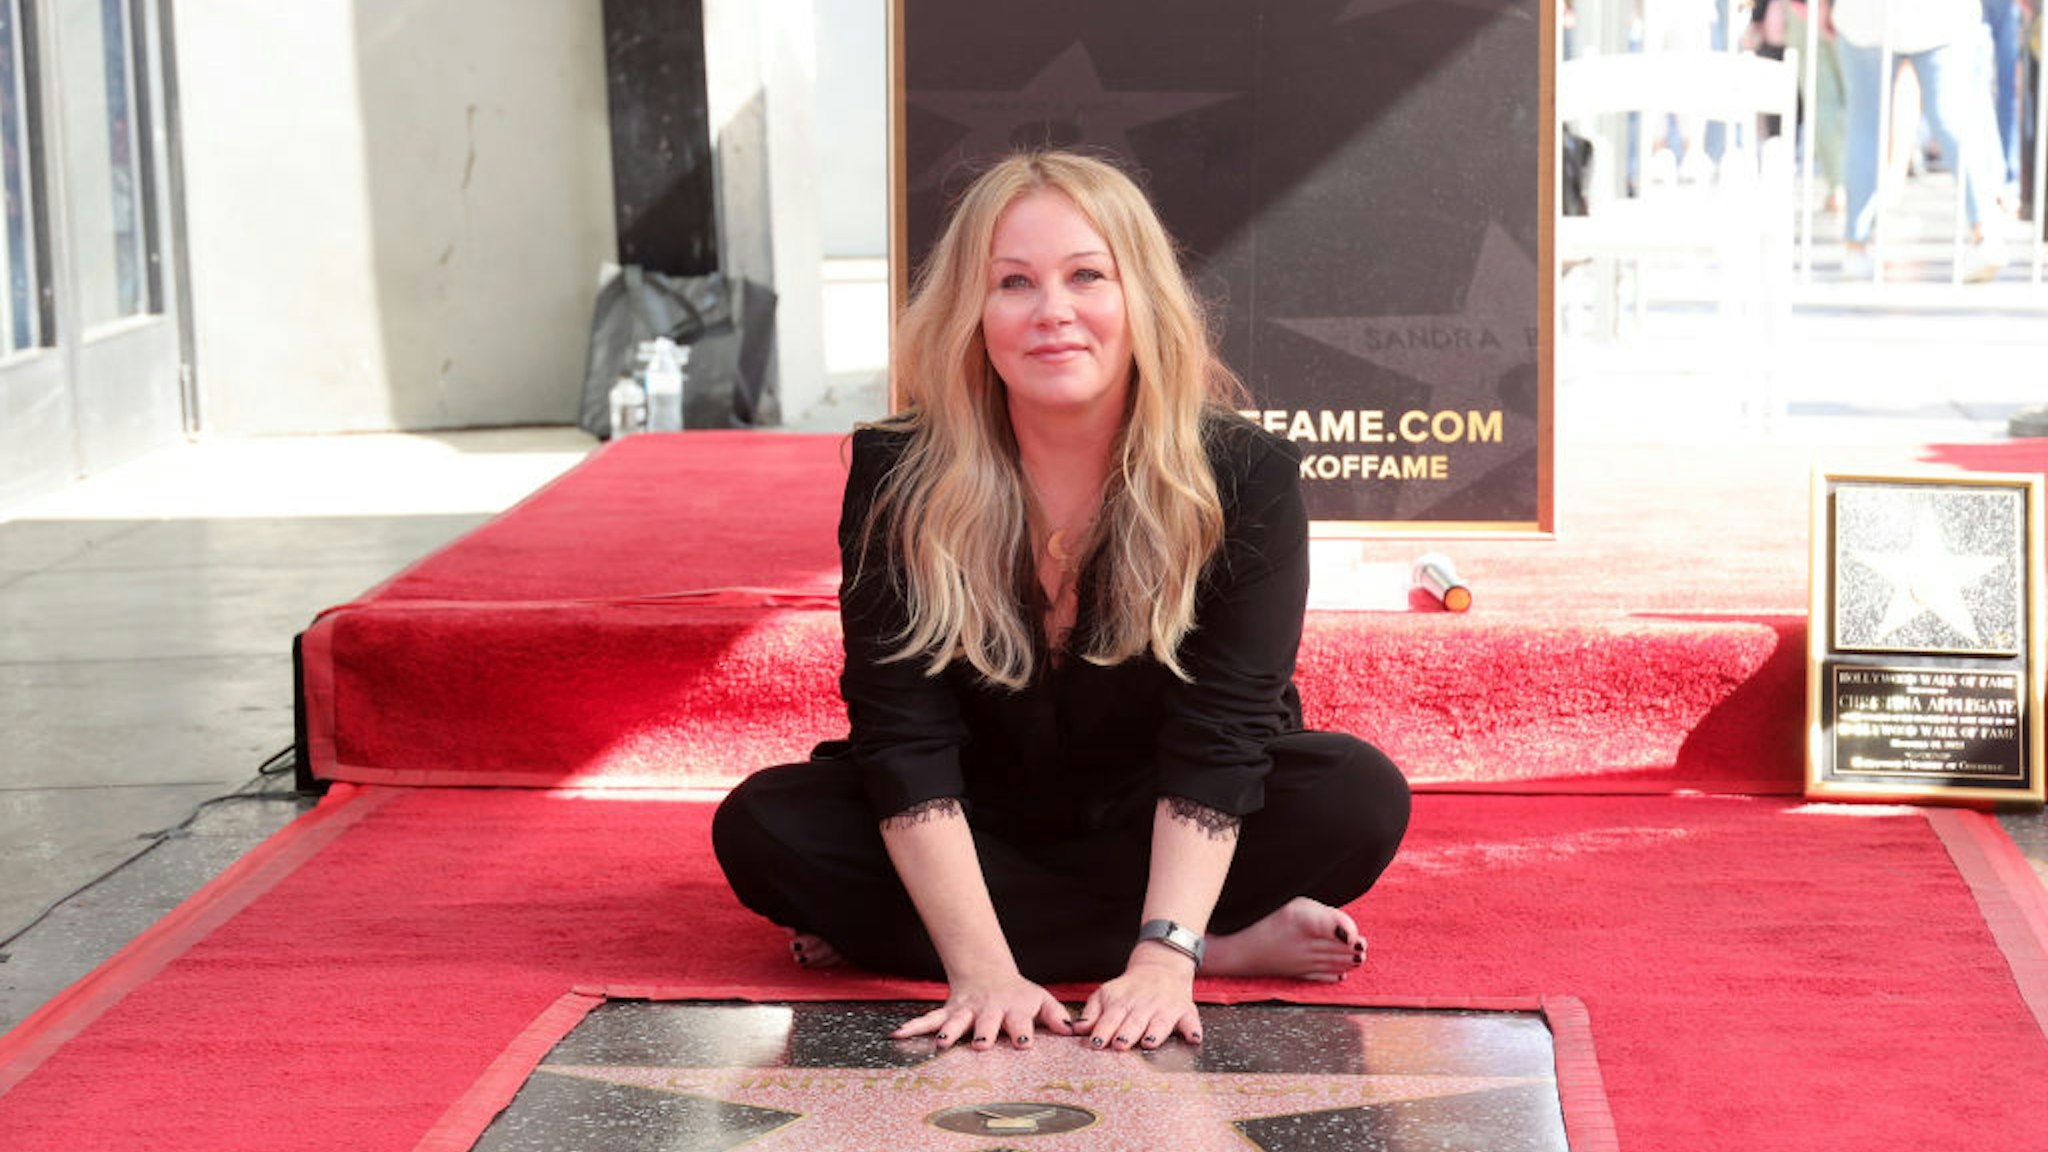 LOS ANGELES, CALIFORNIA - NOVEMBER 14: Christina Applegate attends a ceremony honoring Christina Applegate with a star on the Hollywood Walk Of Fame on November 14, 2022 in Los Angeles, California. (Photo by Emma McIntyre/Getty Images for Netflix)